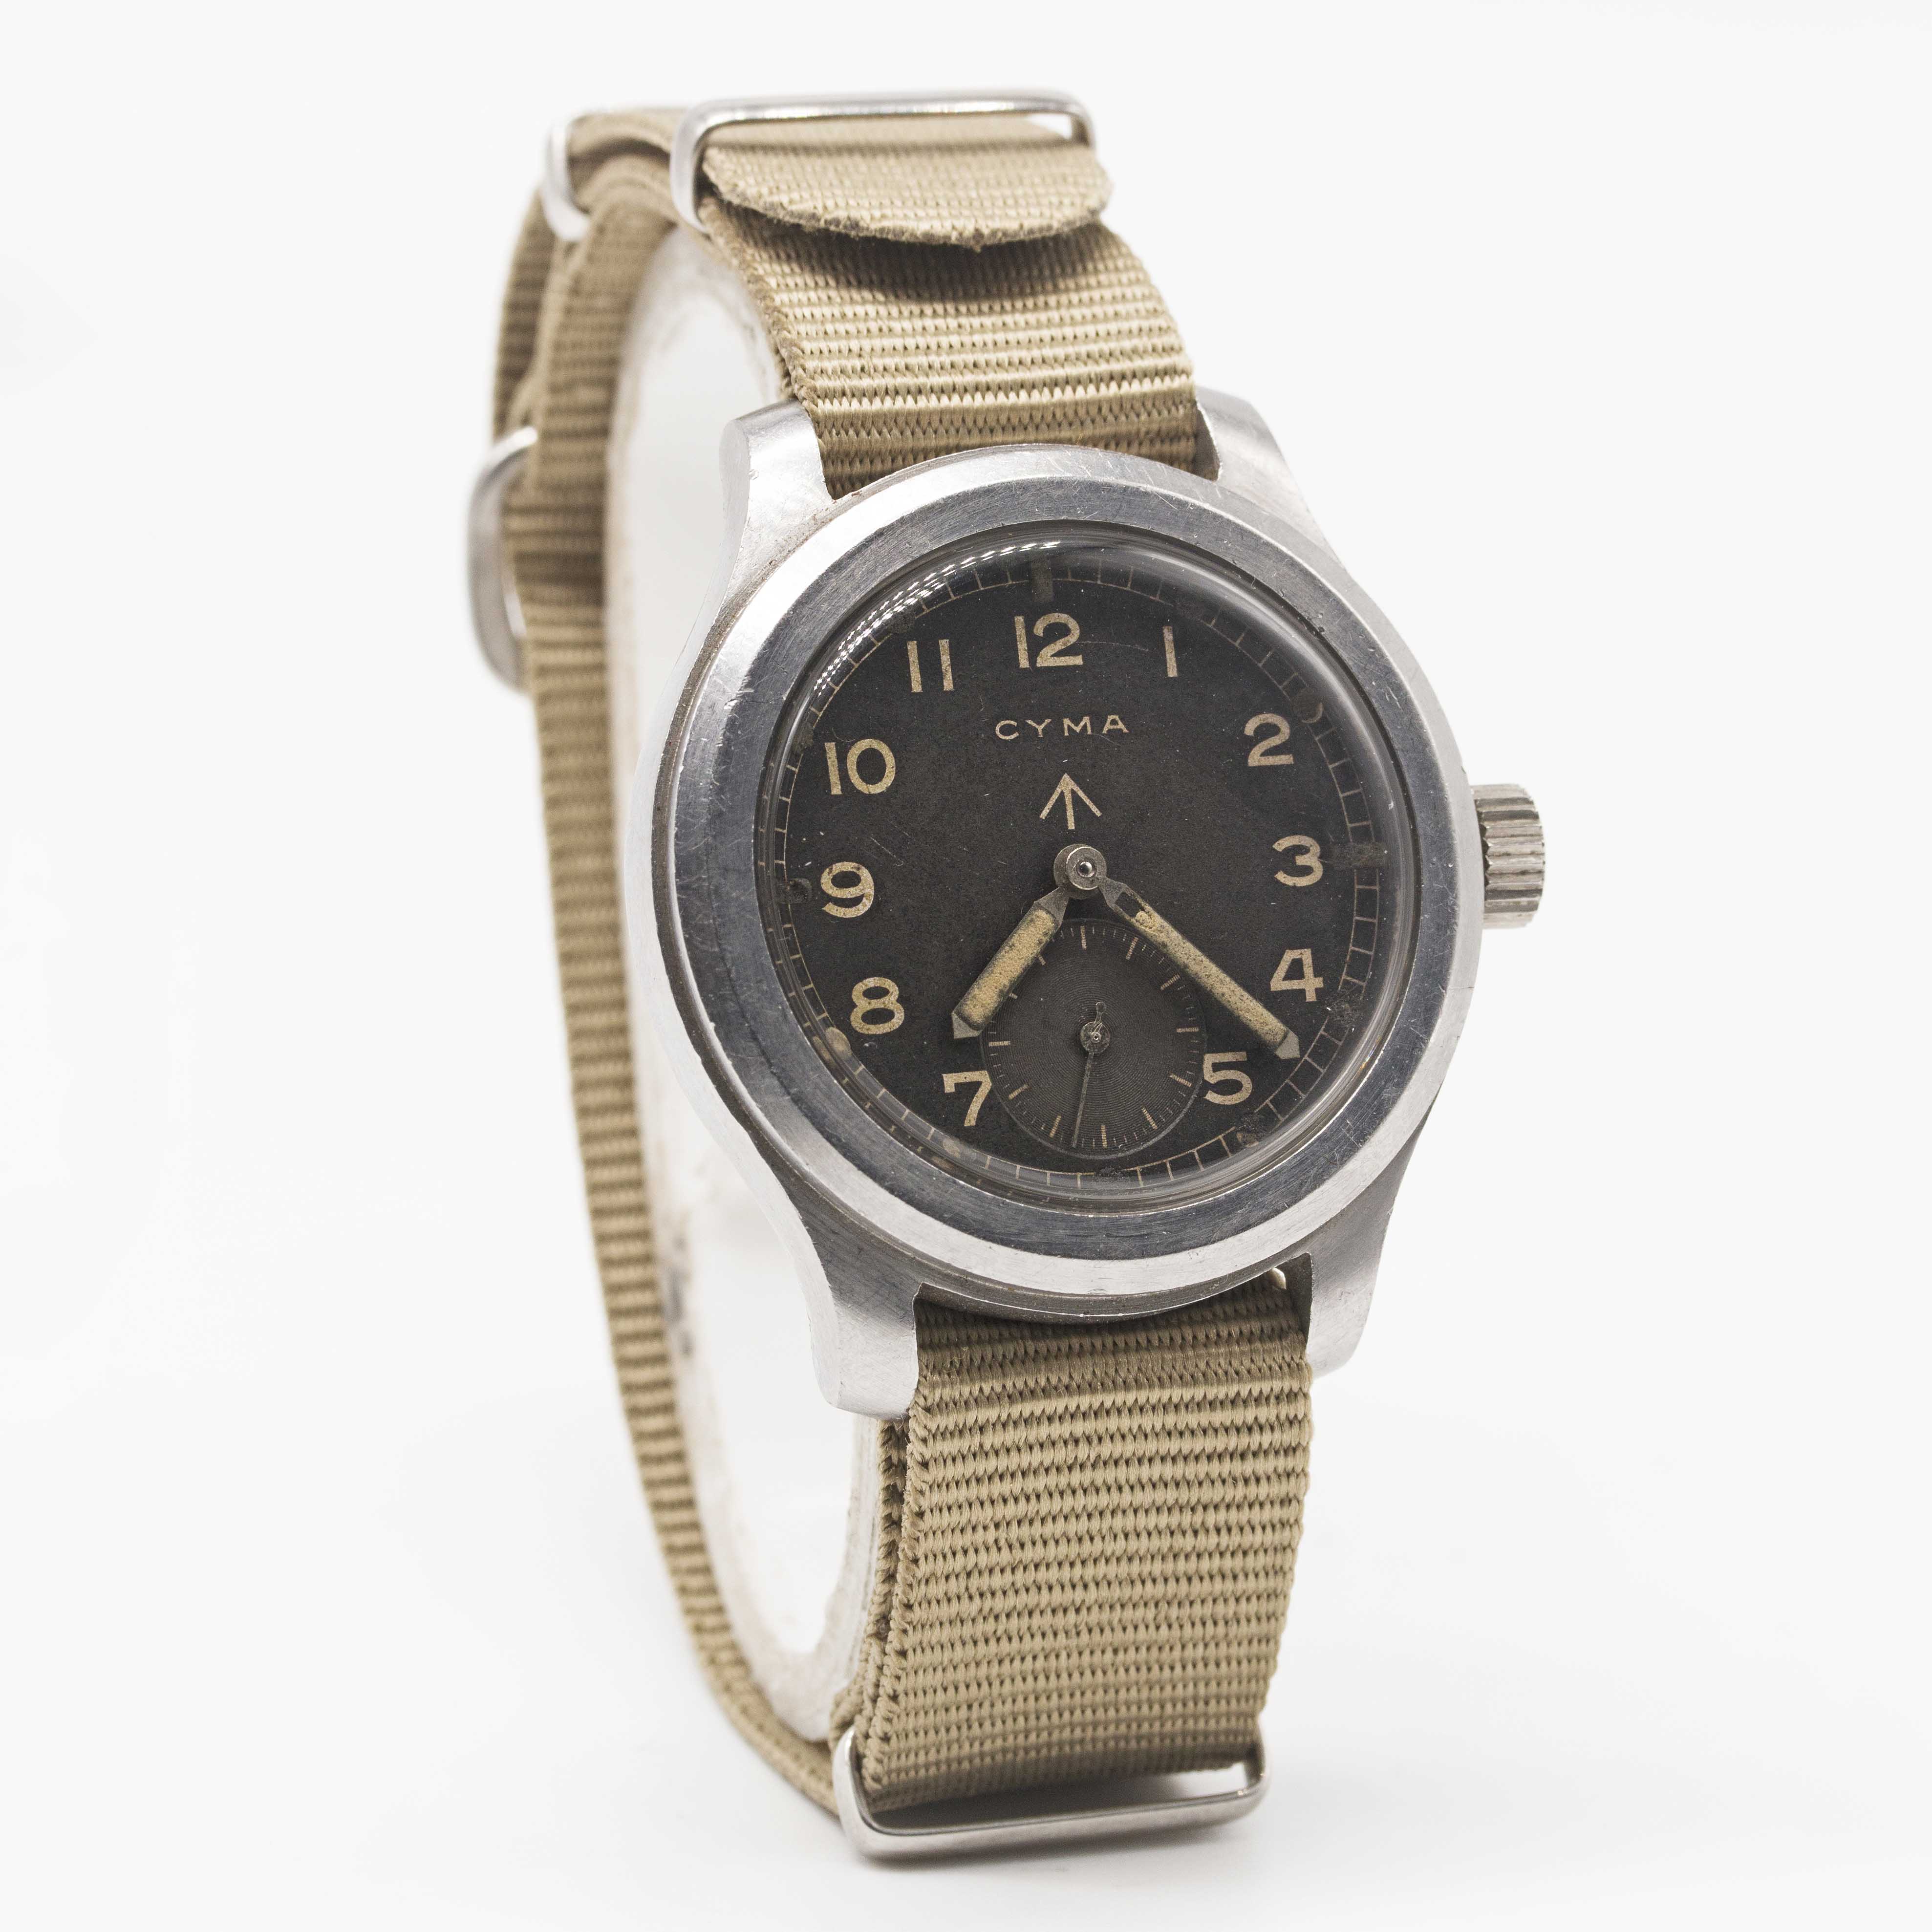 A GENTLEMAN'S STAINLESS STEEL BRITISH MILITARY CYMA W.W.W. WRIST WATCH CIRCA 1945, PART OF THE " - Image 4 of 6